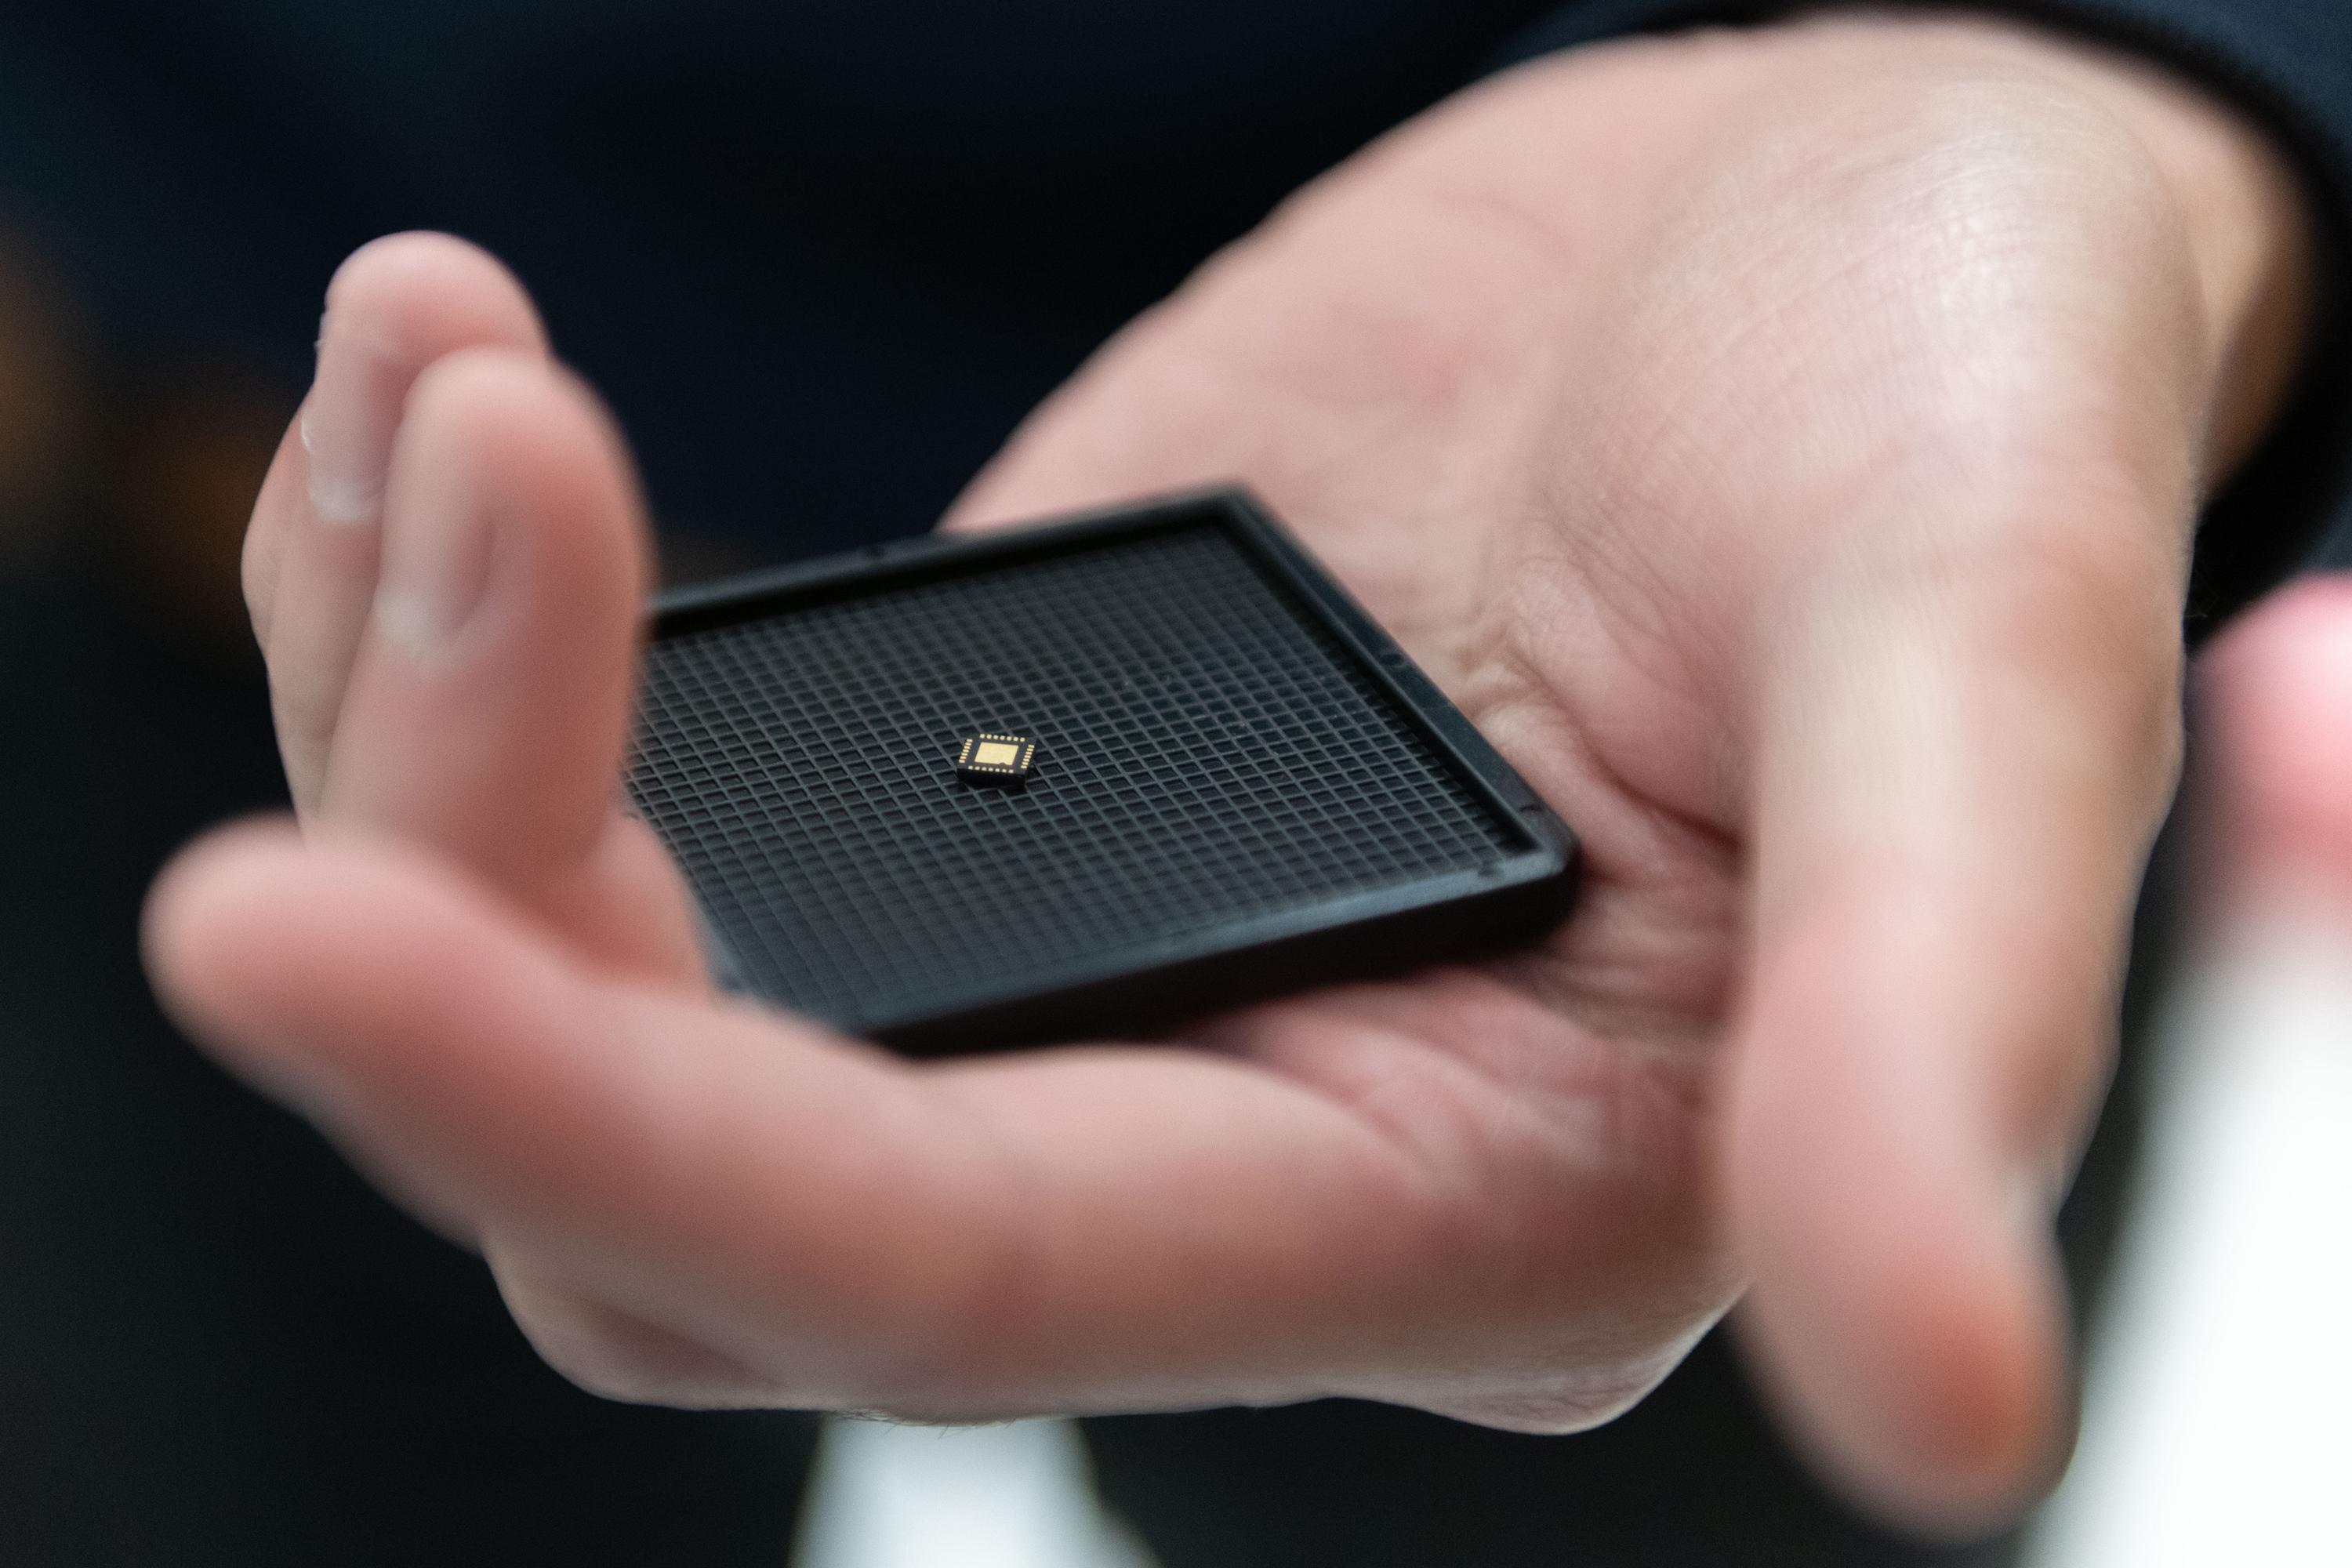 Georgia Tech researchers have developed an ultra-low power hybrid chip inspired by the brain that could help give palm-sized robots the ability to collaborate and learn from their experiences. (Photo: Allison Carter, Georgia Tech)